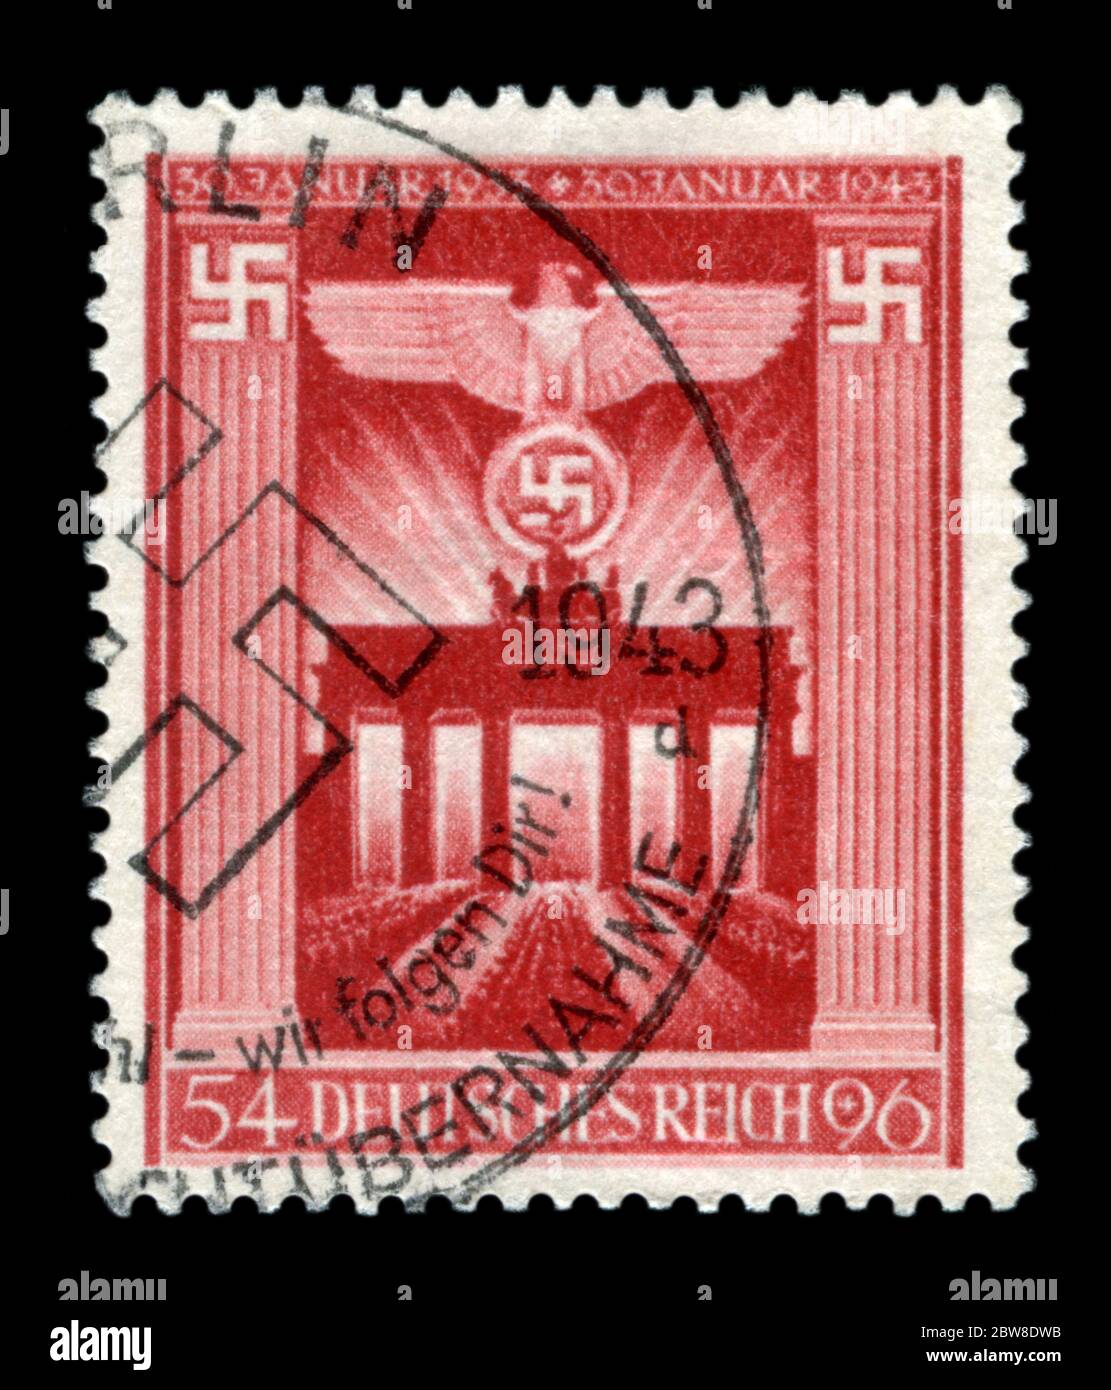 German historical stamp: 10th anniversary of Adolf Hitler's takeover of power. Imperial eagle on the background of the Brandenburg gate. Germany Stock Photo